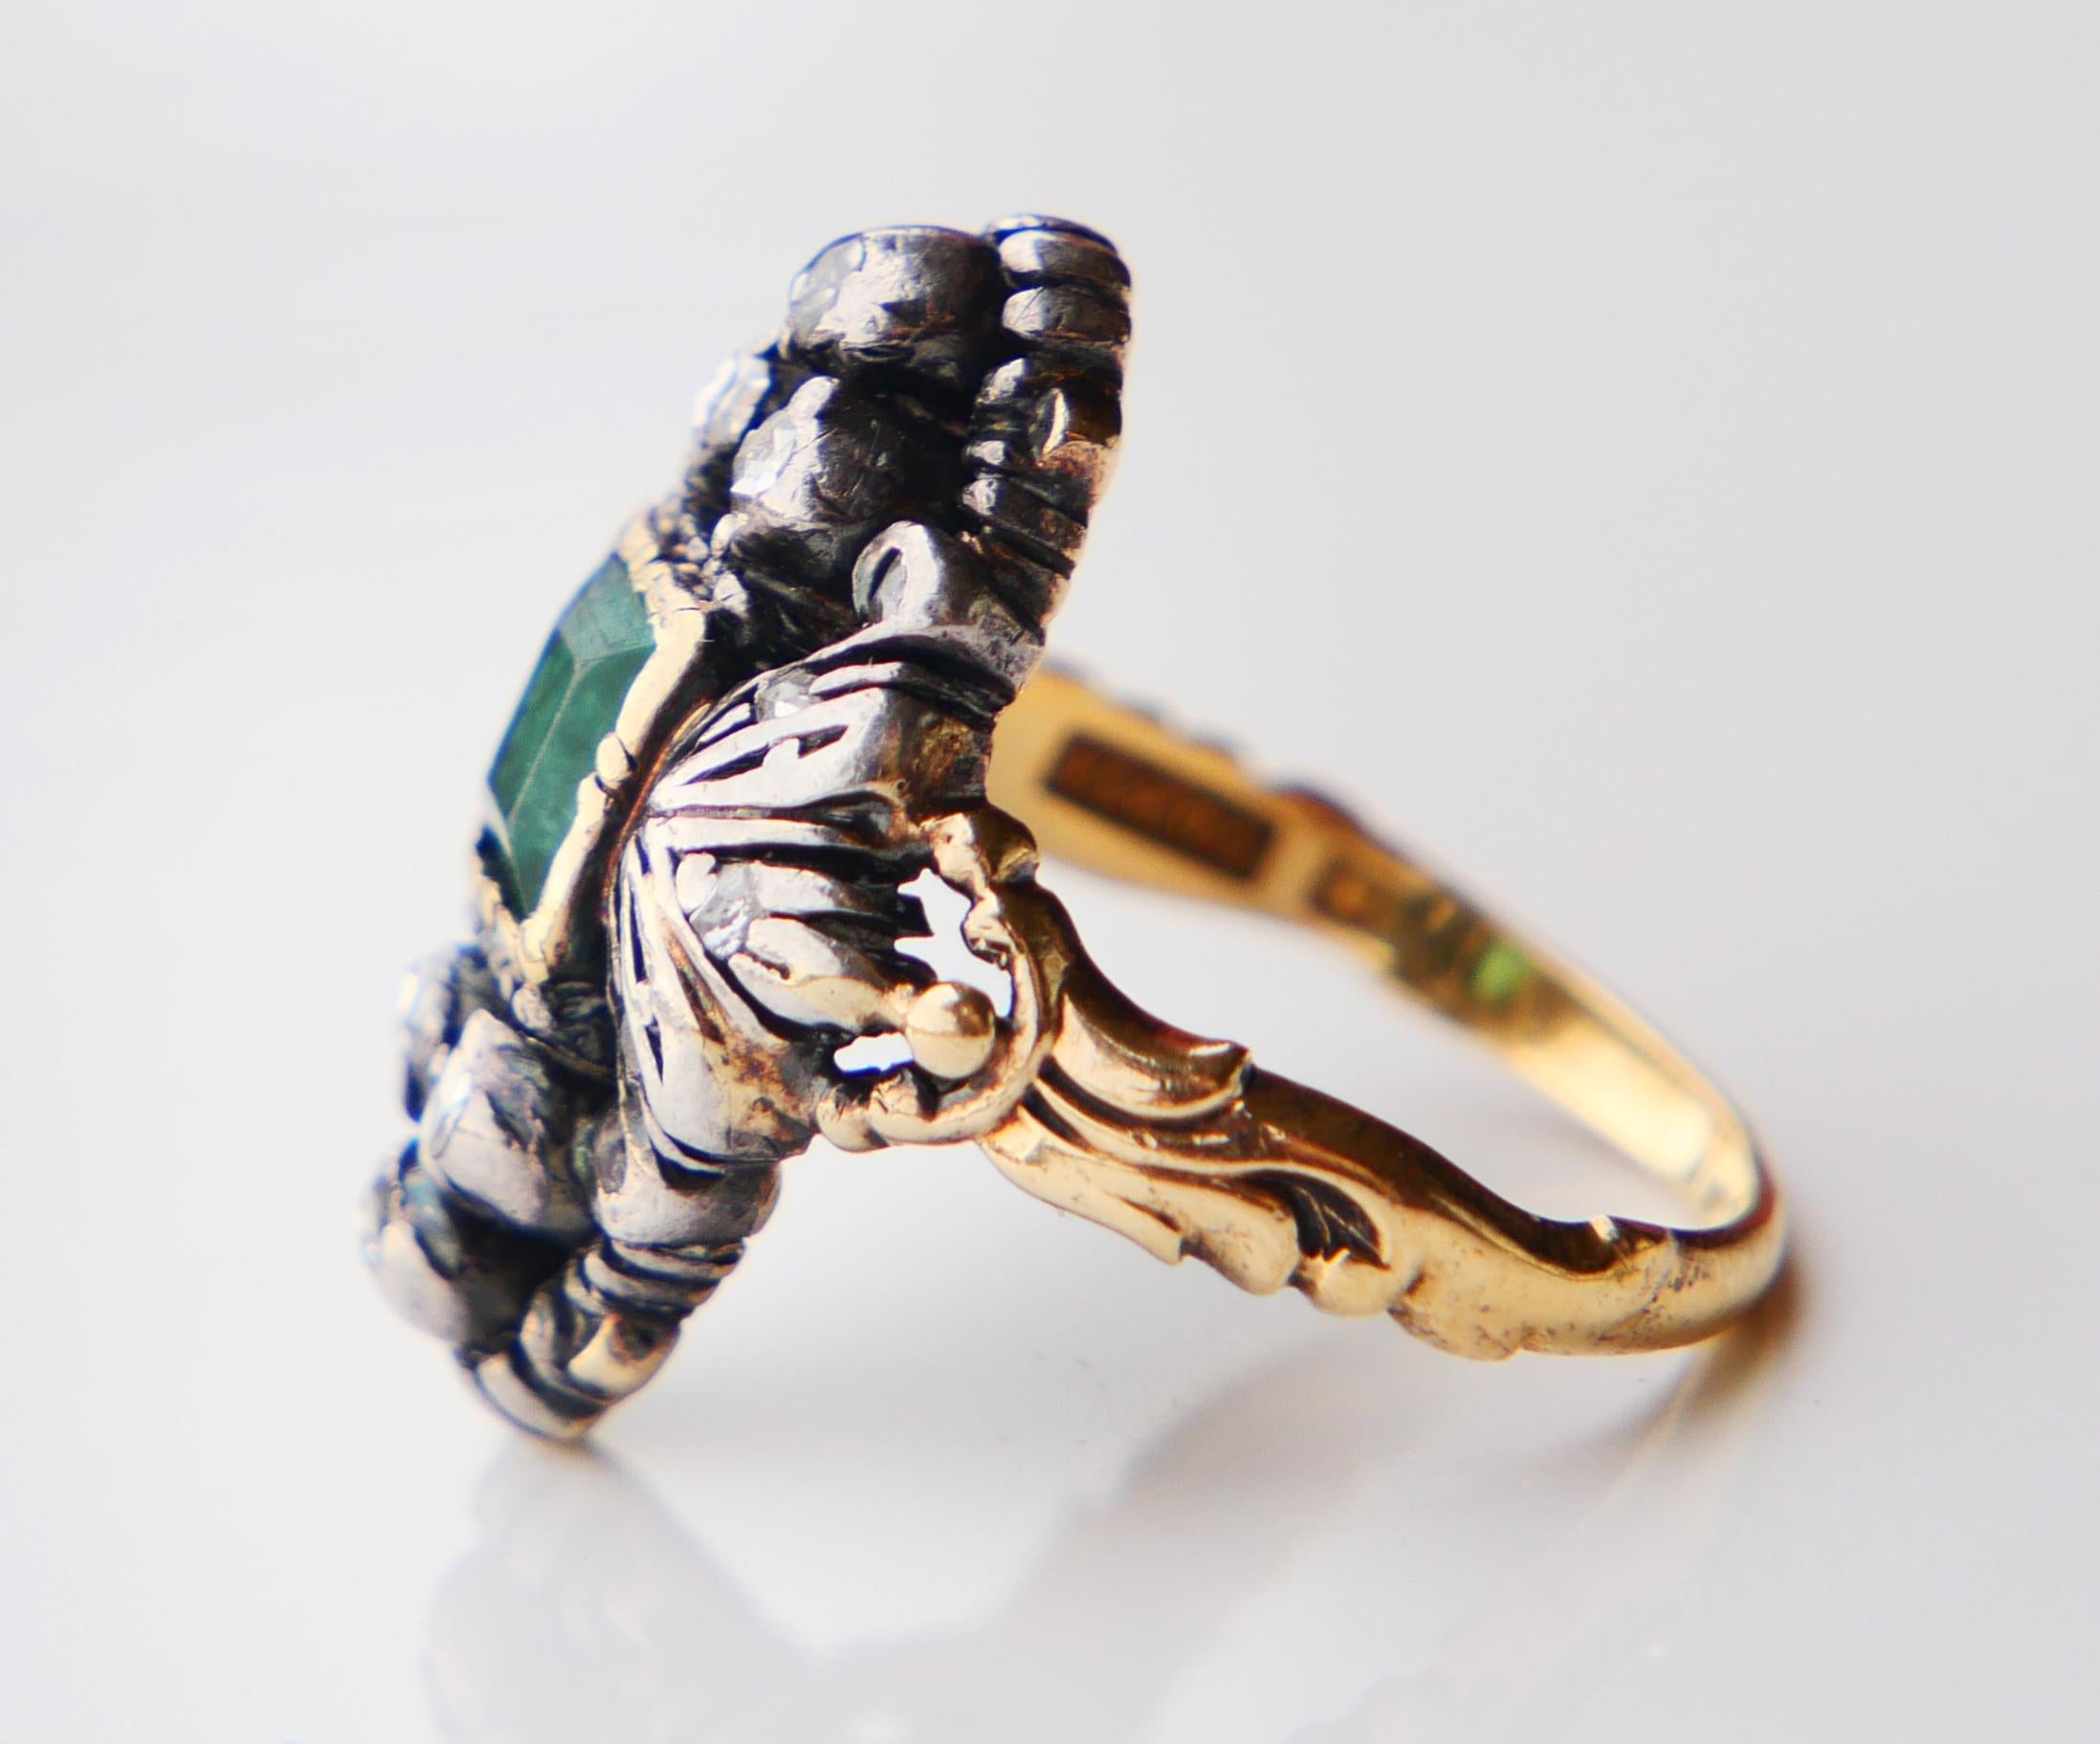 1931 old Ring 1ct Emerald 0.5ctw Diamonds solid 18K Gold Silver ØUS5.5/6.6gr For Sale 4